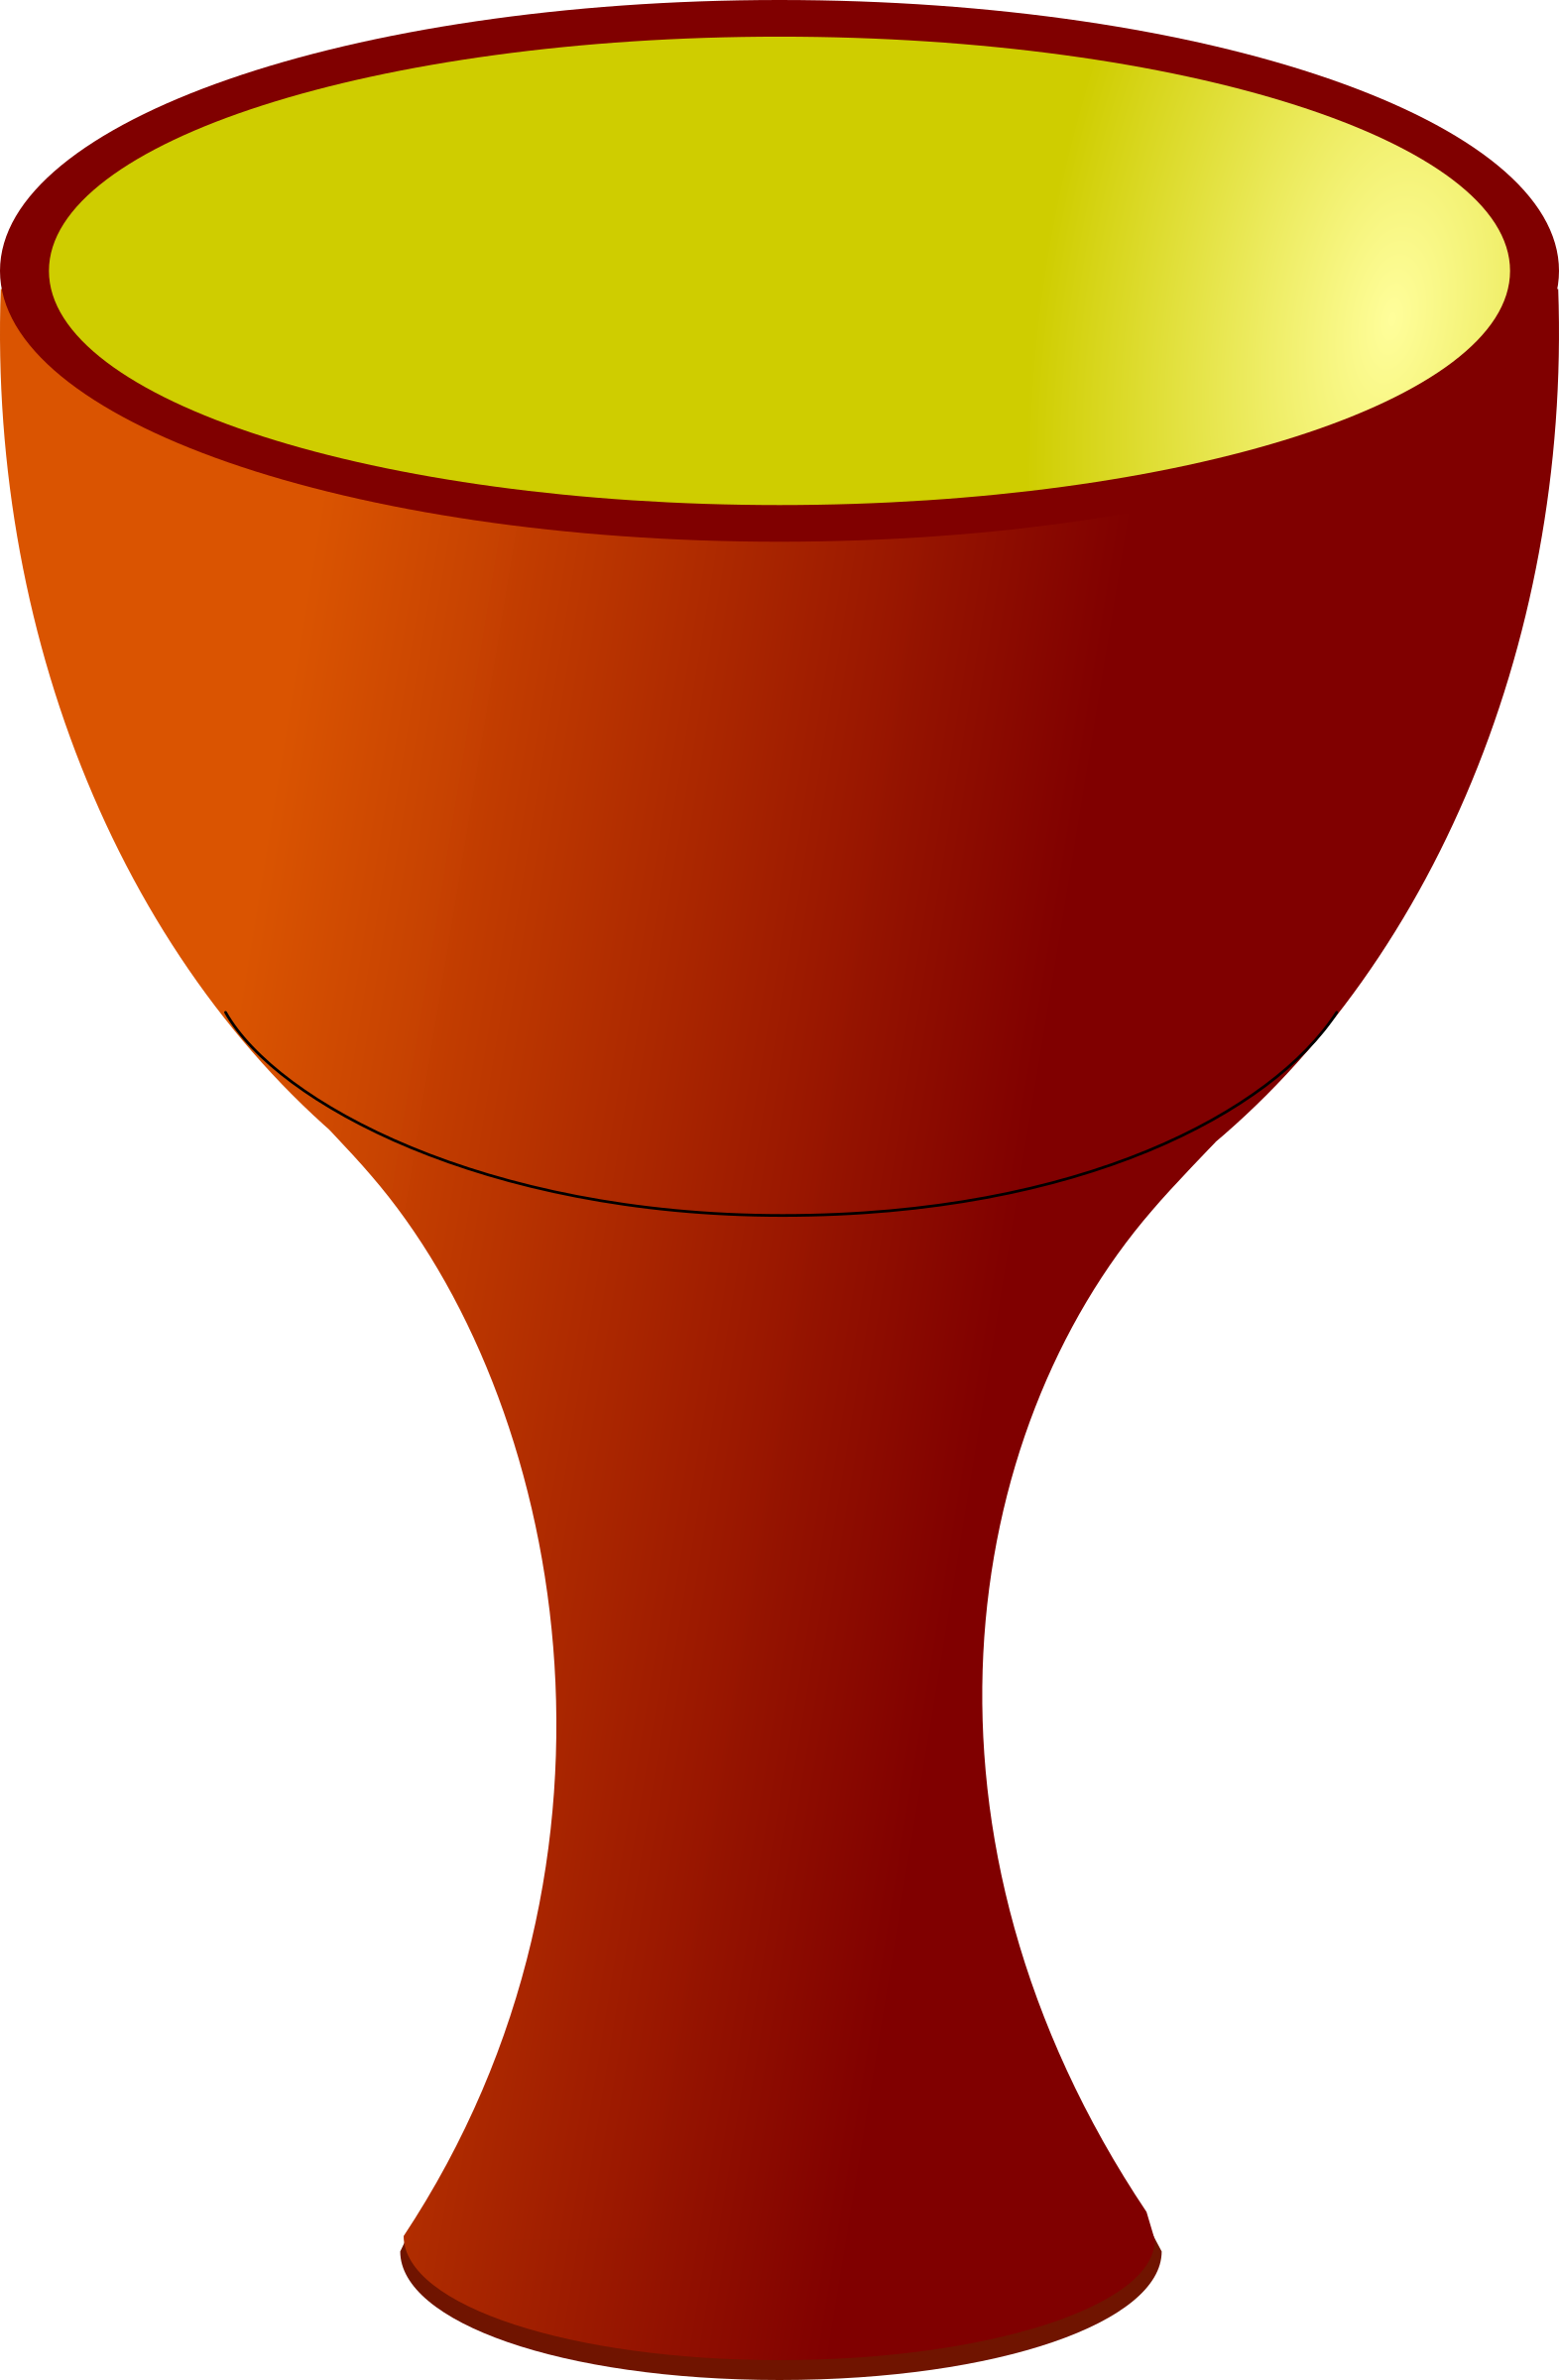 Chalice clipart holy grail. Download transparent 